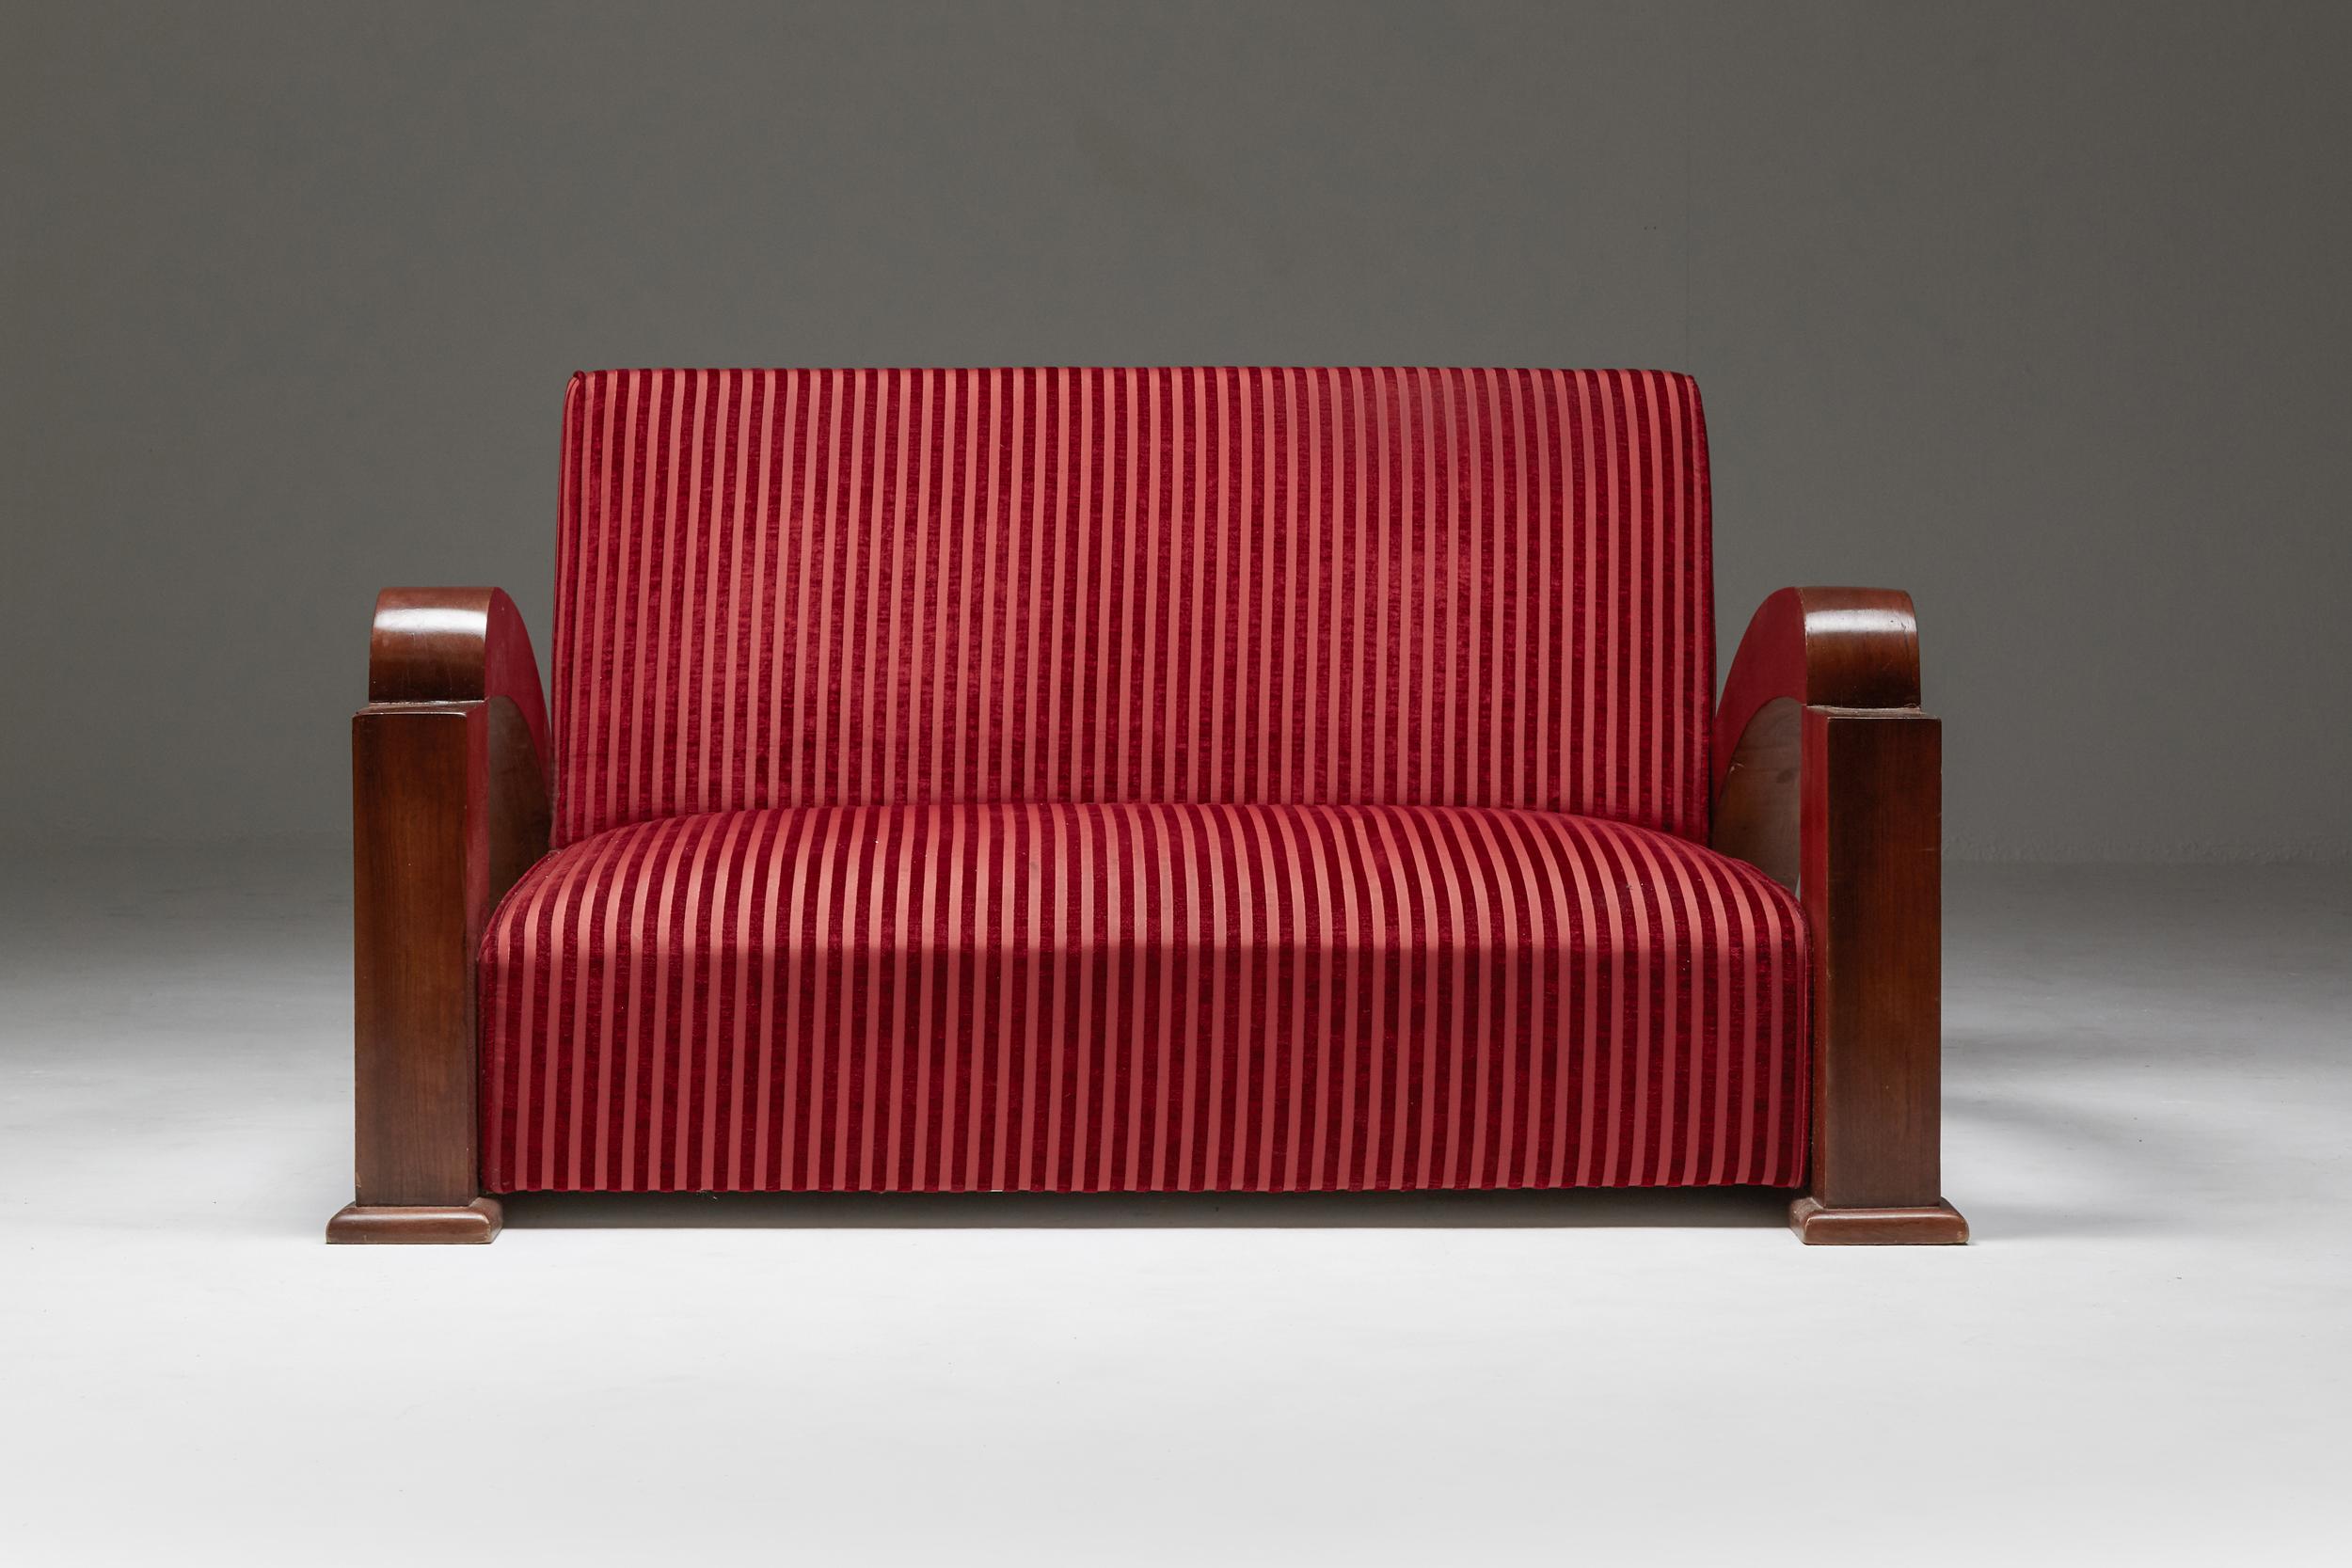 Art Deco, settee, red velvet, France, early to mid 20th century

Impressive settee
the swoosh like armrests give these bulky pieces an elegant and streamlined effect.
The fruitwood veneered frames are nicely contrasted by the red pin stripe